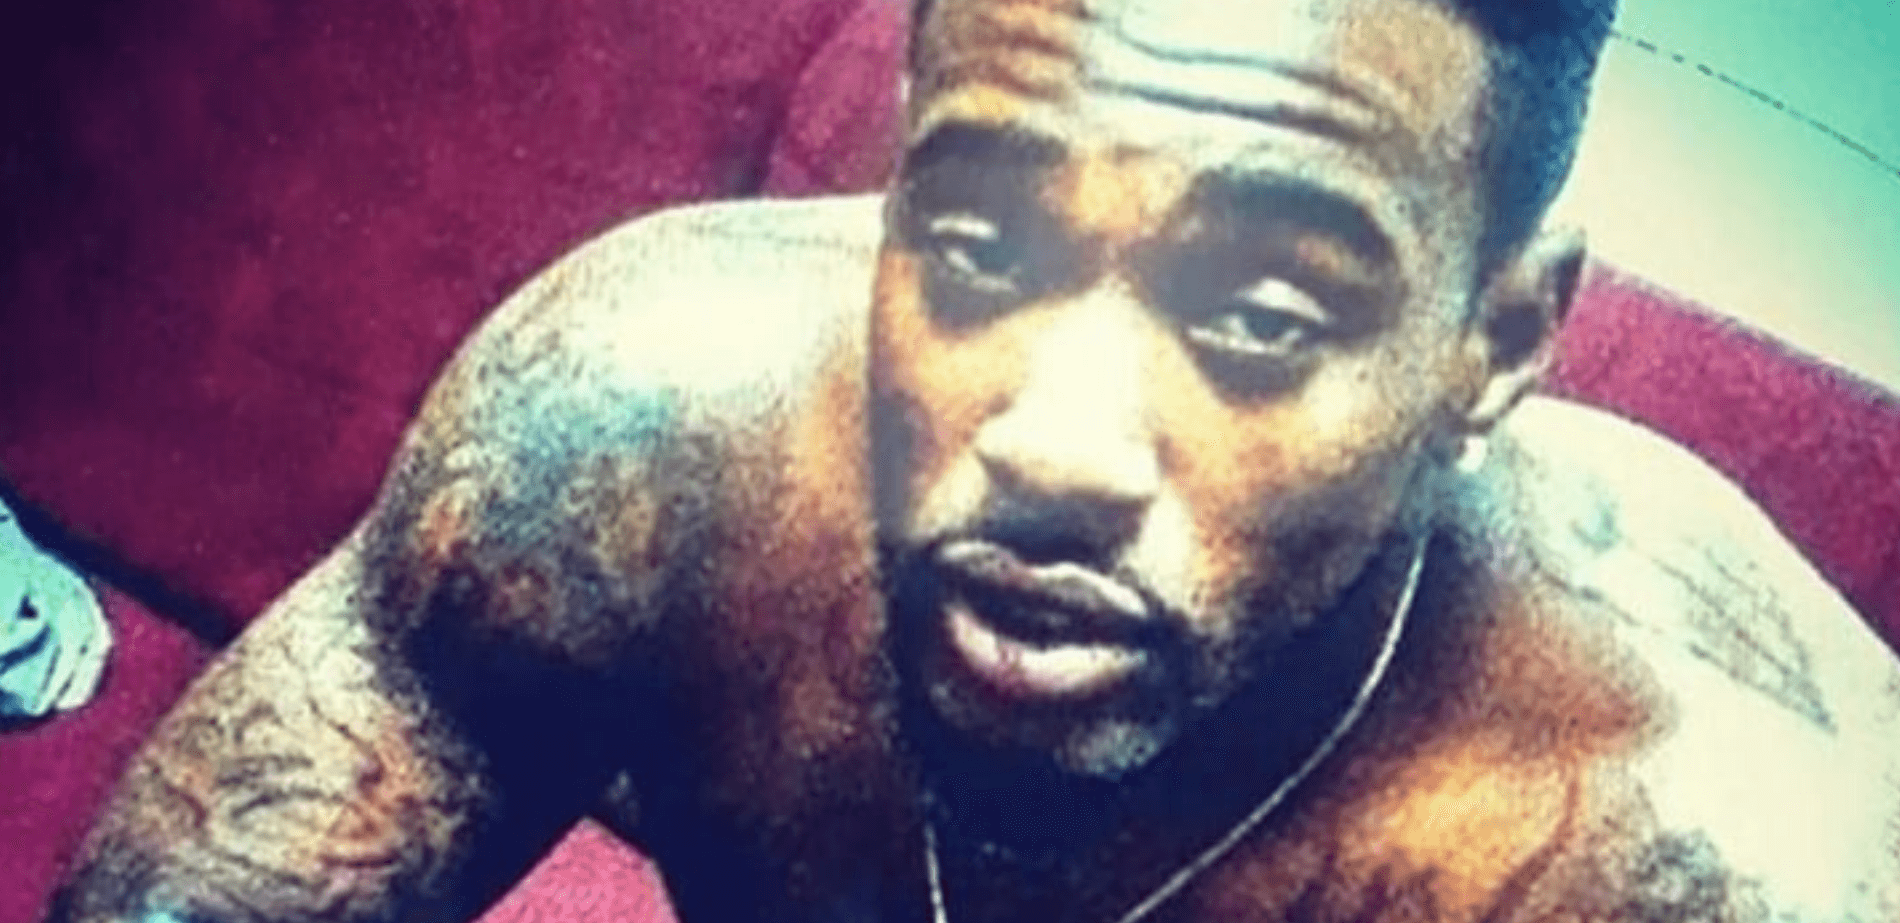 The Mysterious Prison Death of Anthony Myrie